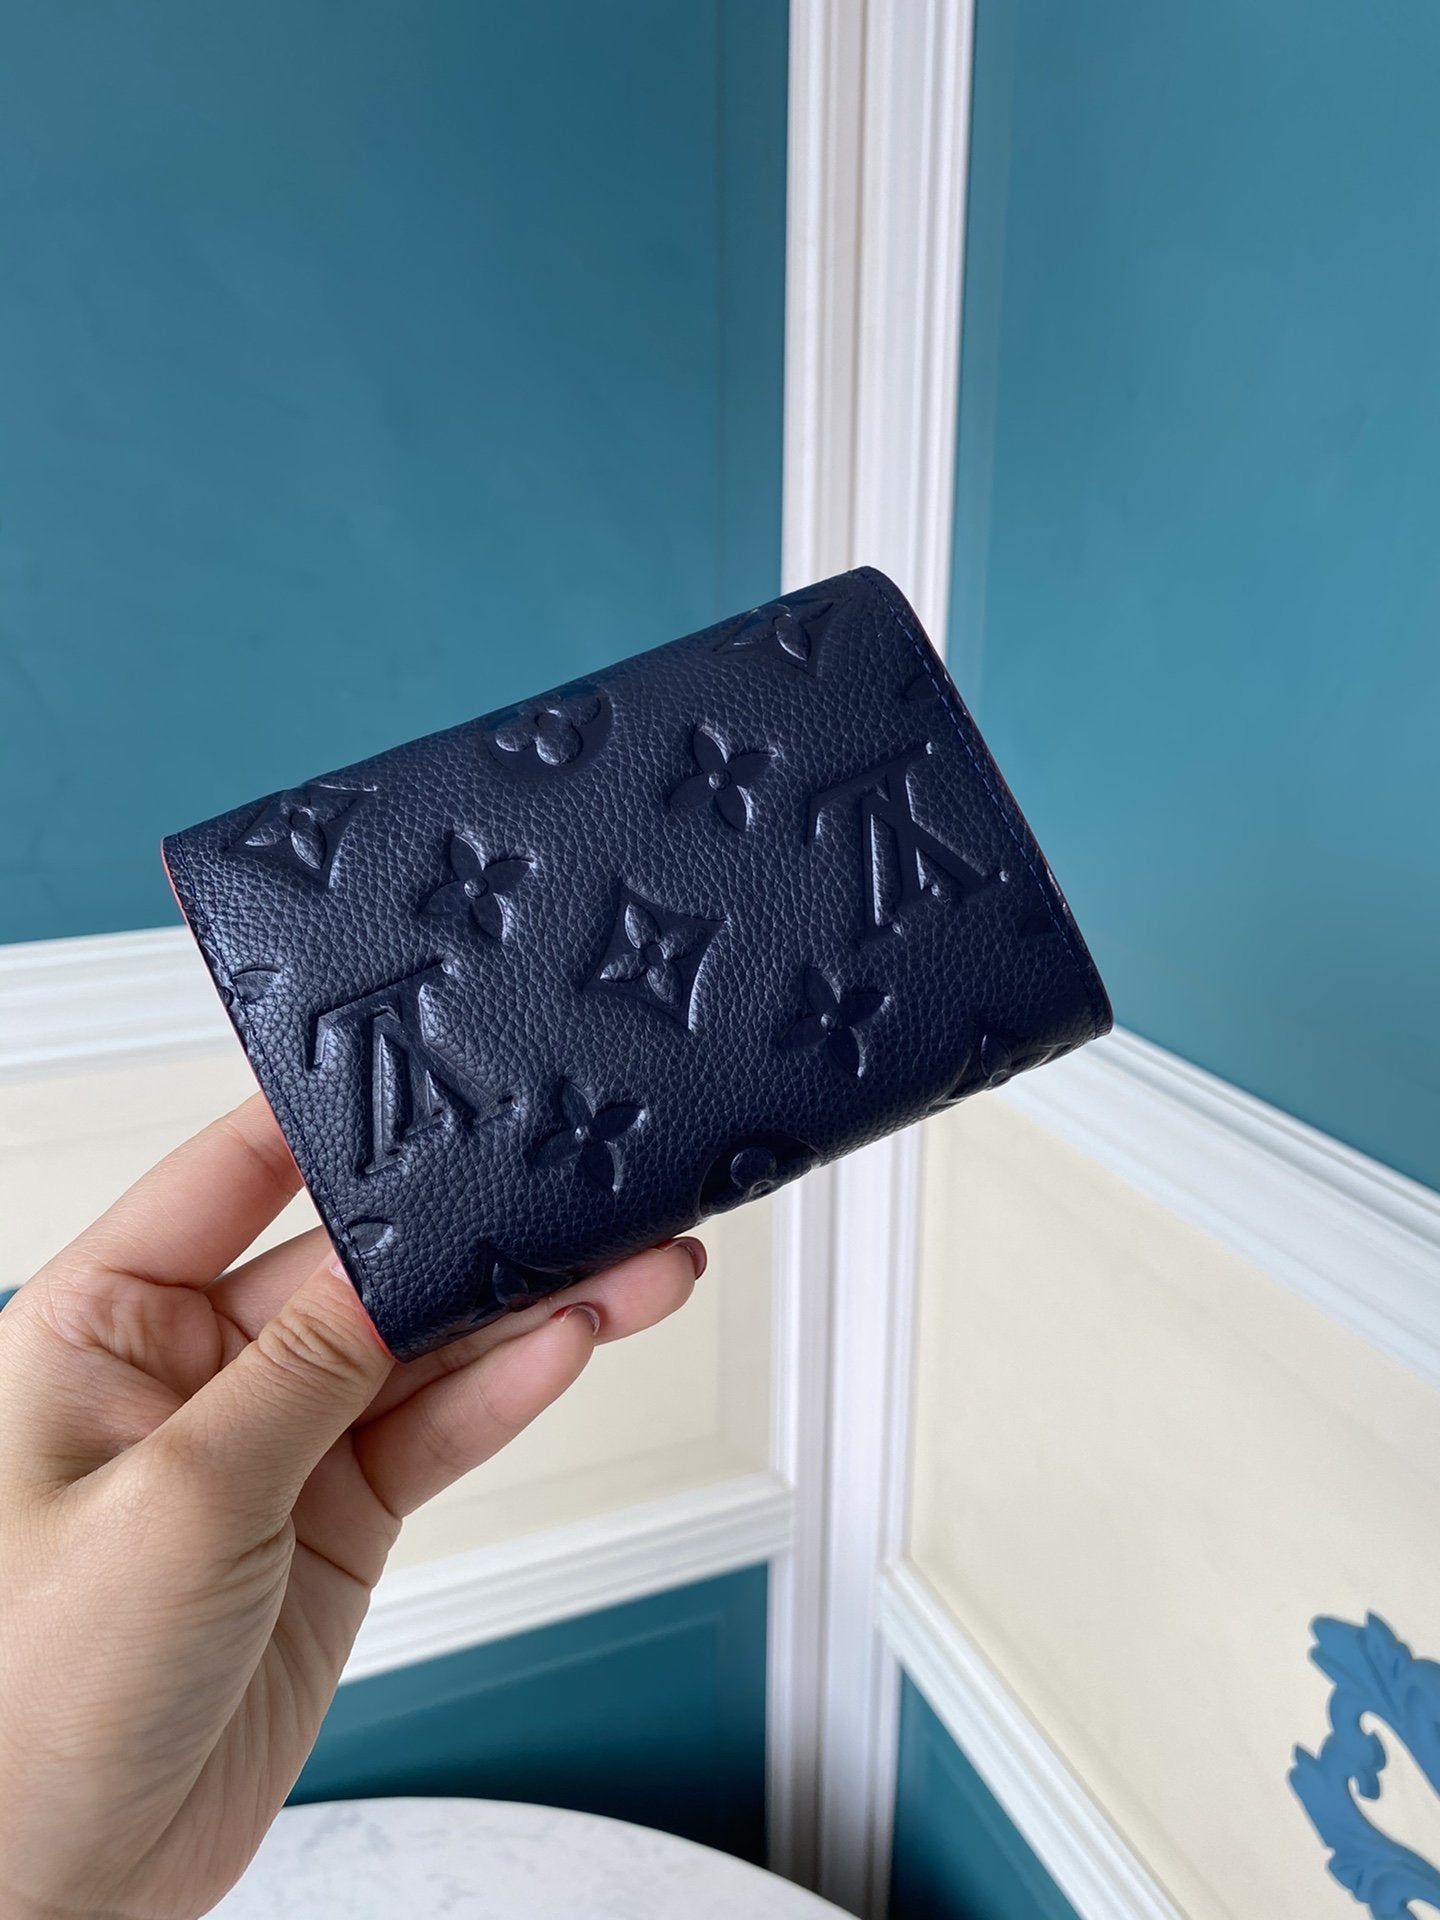 EI -New Wallets LUV 059